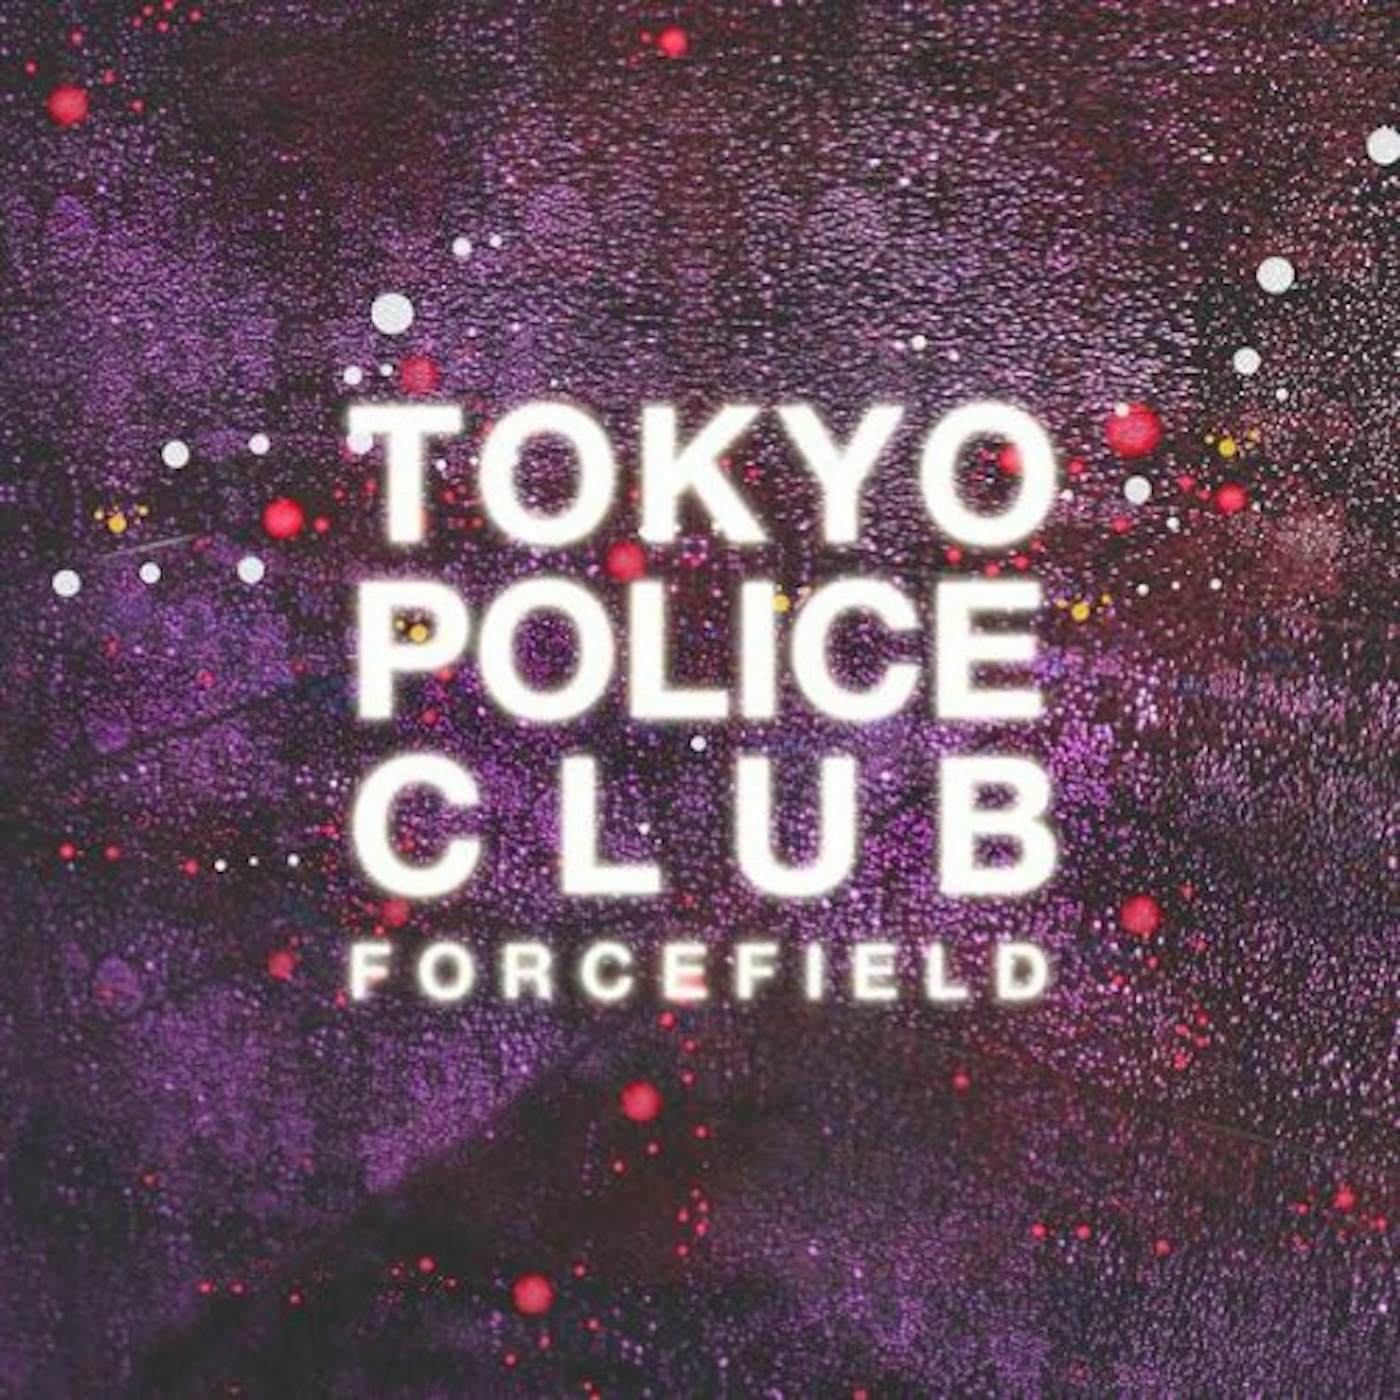 Tokyo Police Club FORCEFIELD (CLEAR VINYL) Vinyl Record